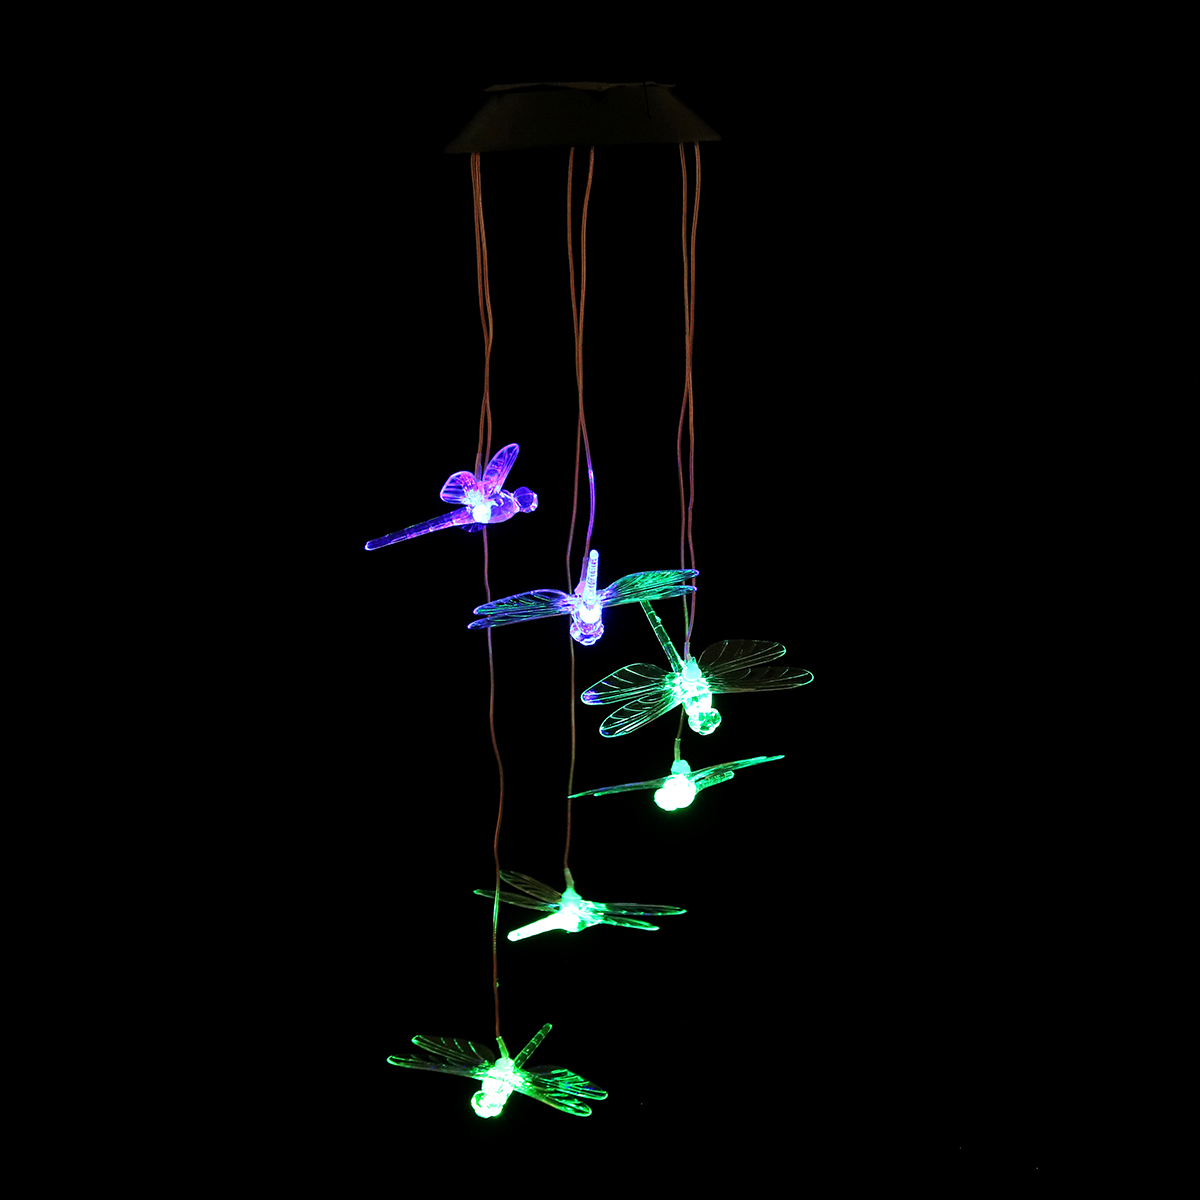 Color-Changing-LED-Solar-Powered-Wind-Chime-Light-Hanging-Garden-Yard-Decor-1760795-10